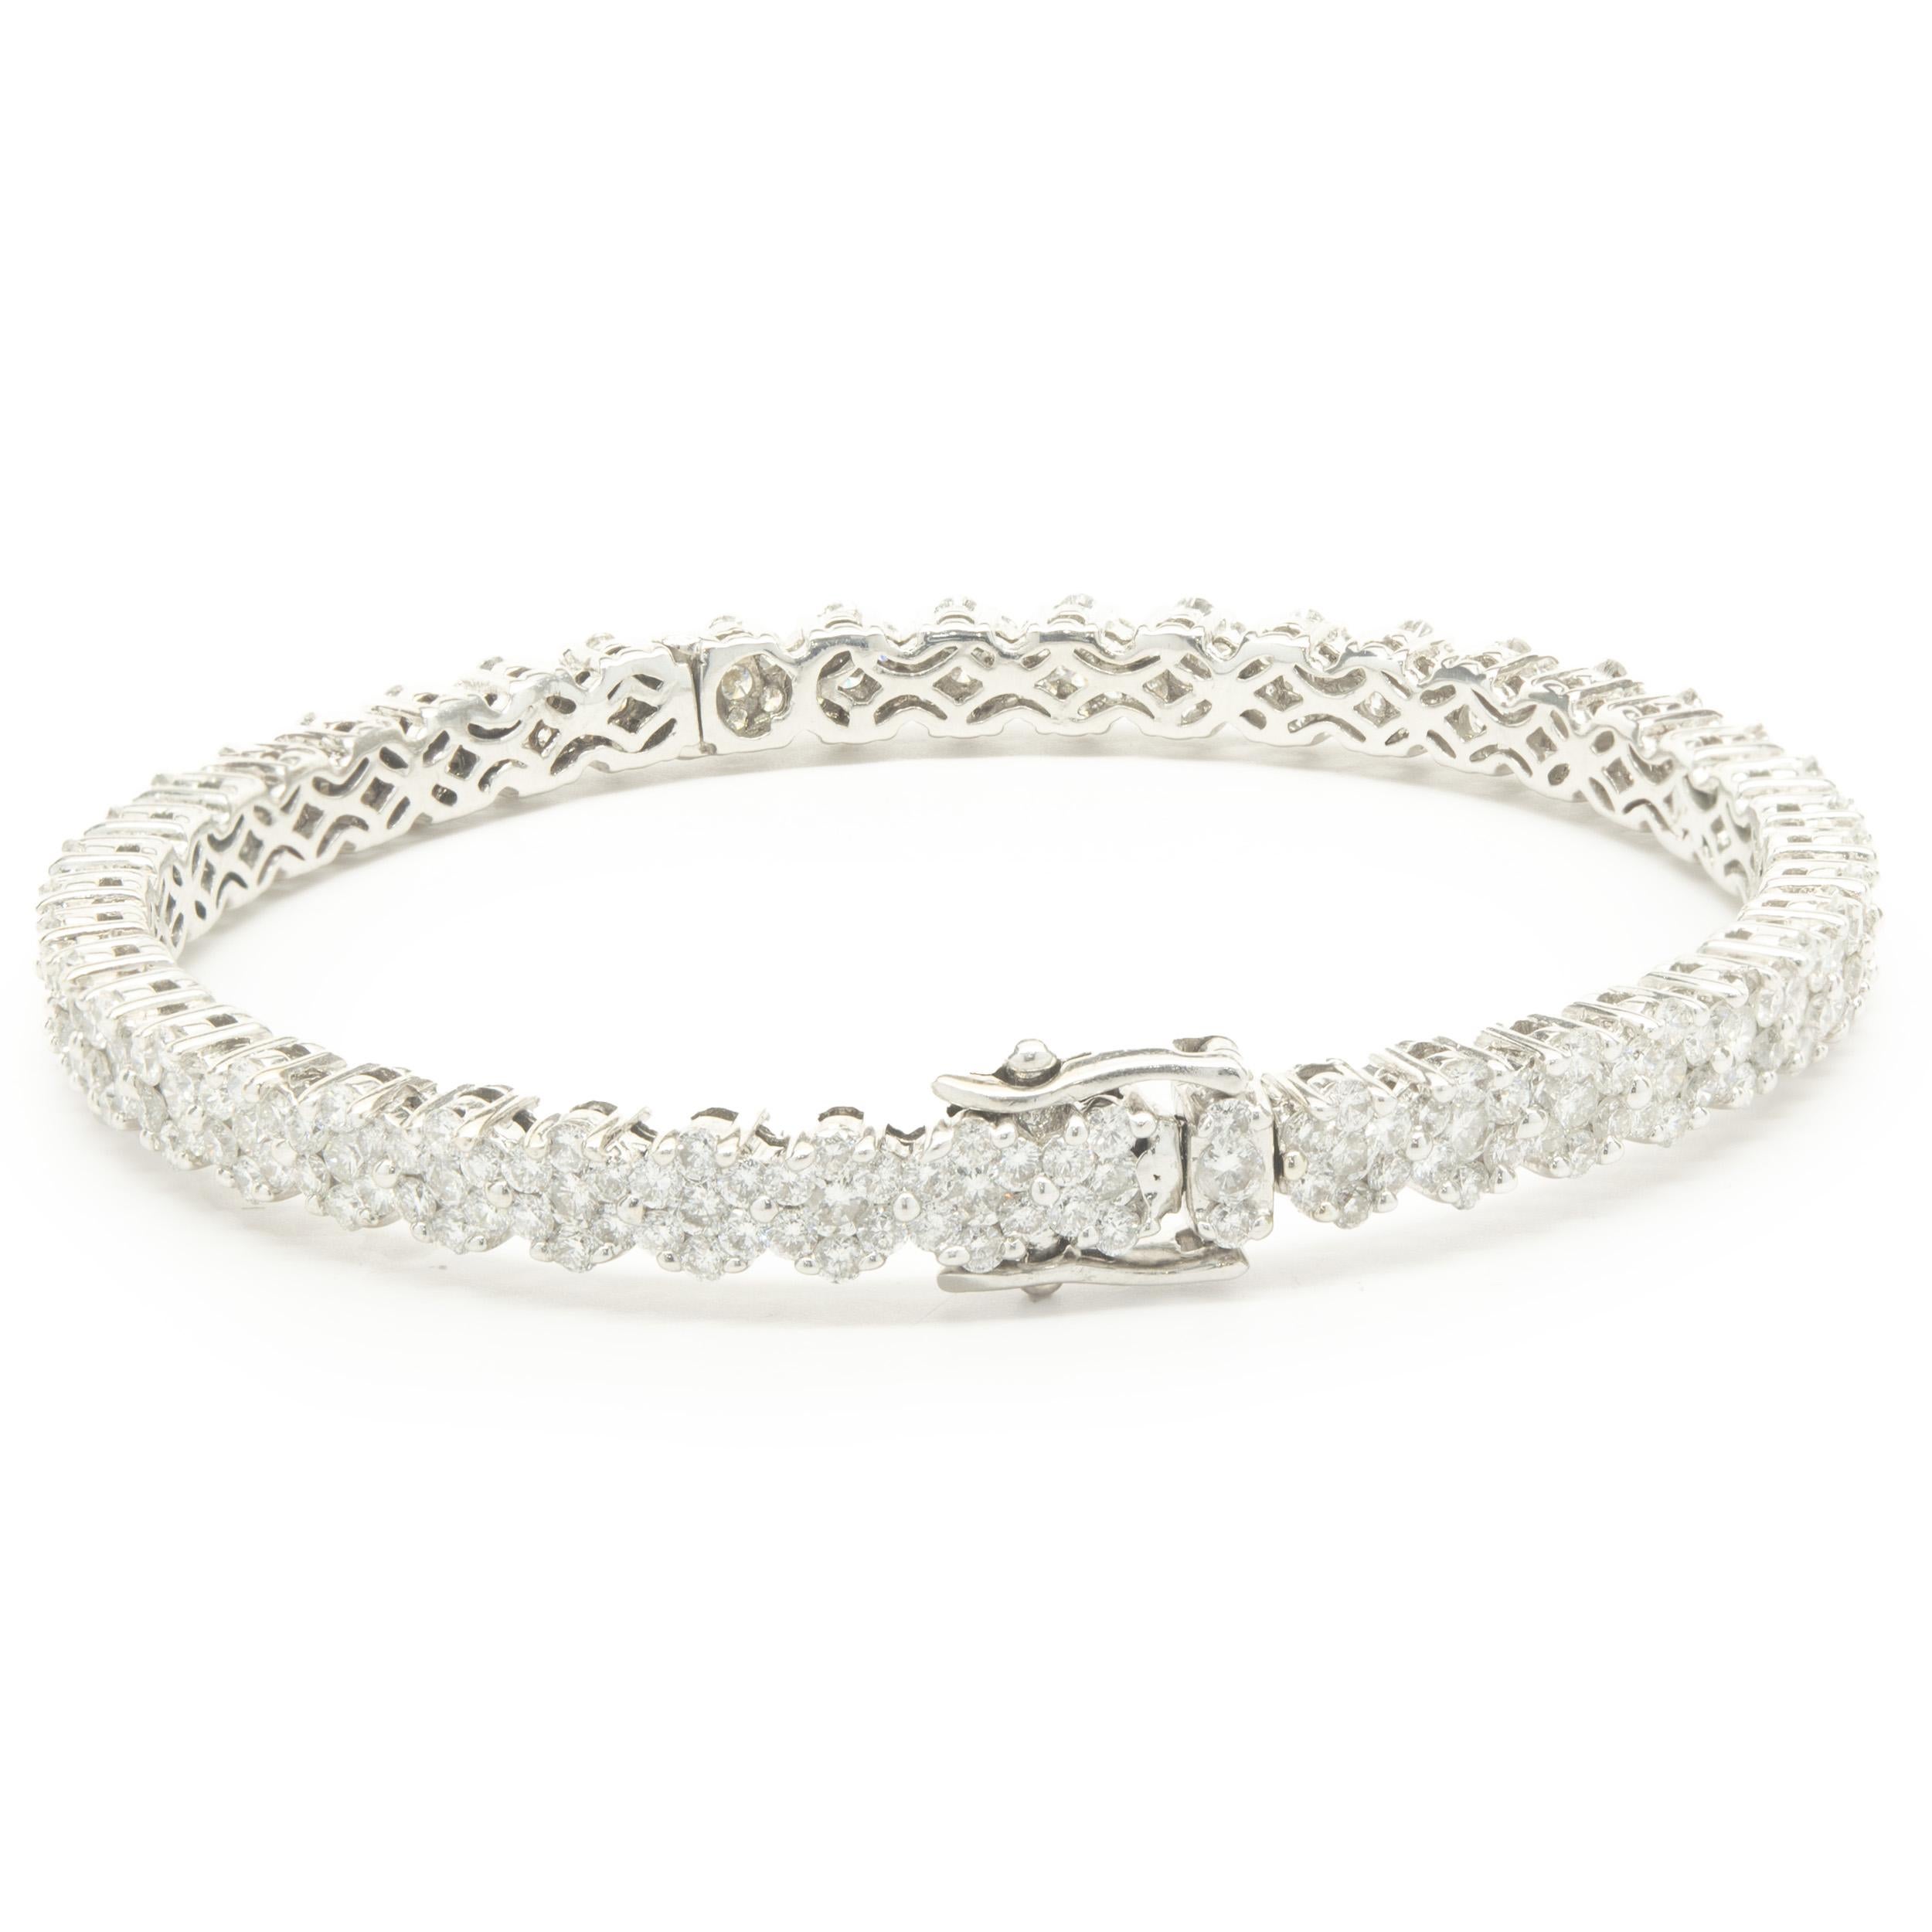 Designer: custom
Material: 14K white gold 
Diamond: 298 round brilliant cut = 5.50cttw
Color: G
Clarity: VS2
Weight: 16.52
Dimensions: bracelet will fit up to a 6.5-inch wrist